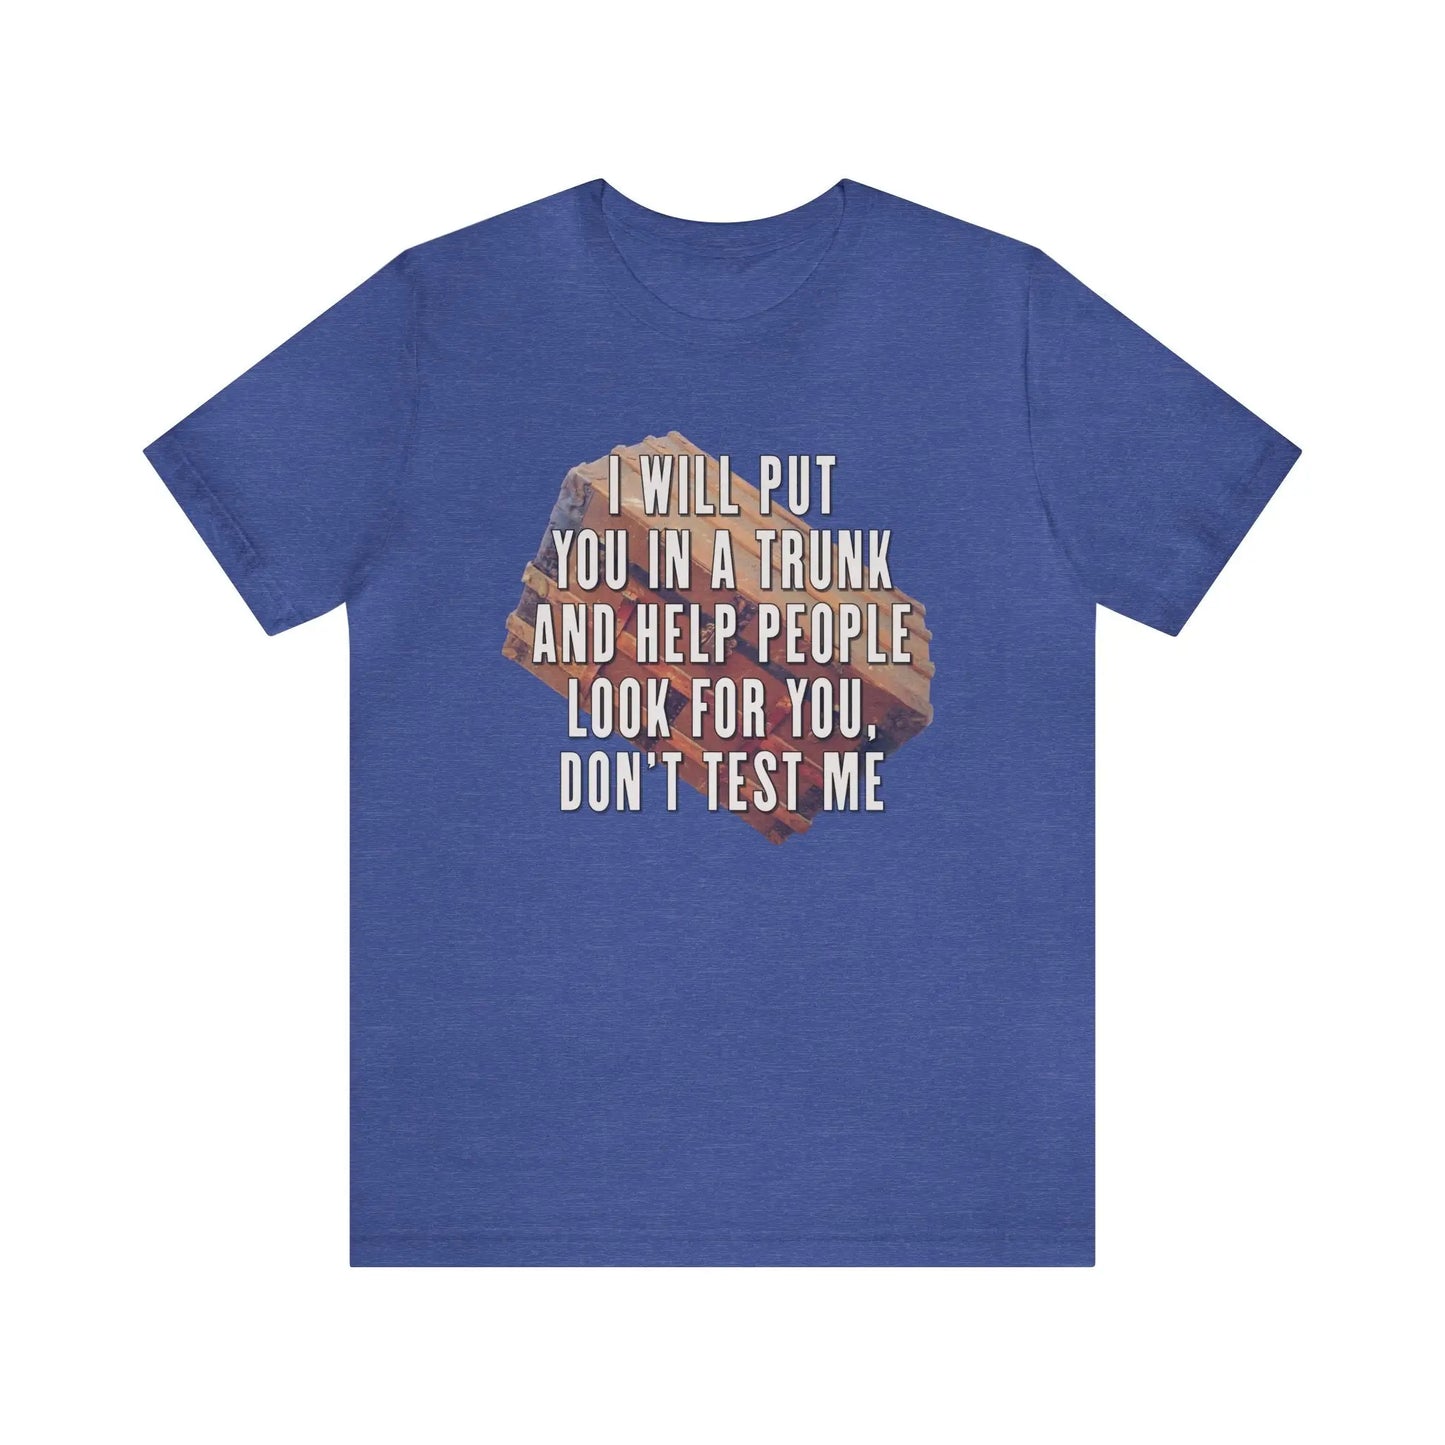 Put You In A Trunk Men's Jersey Short Sleeve Tee - Wicked Tees